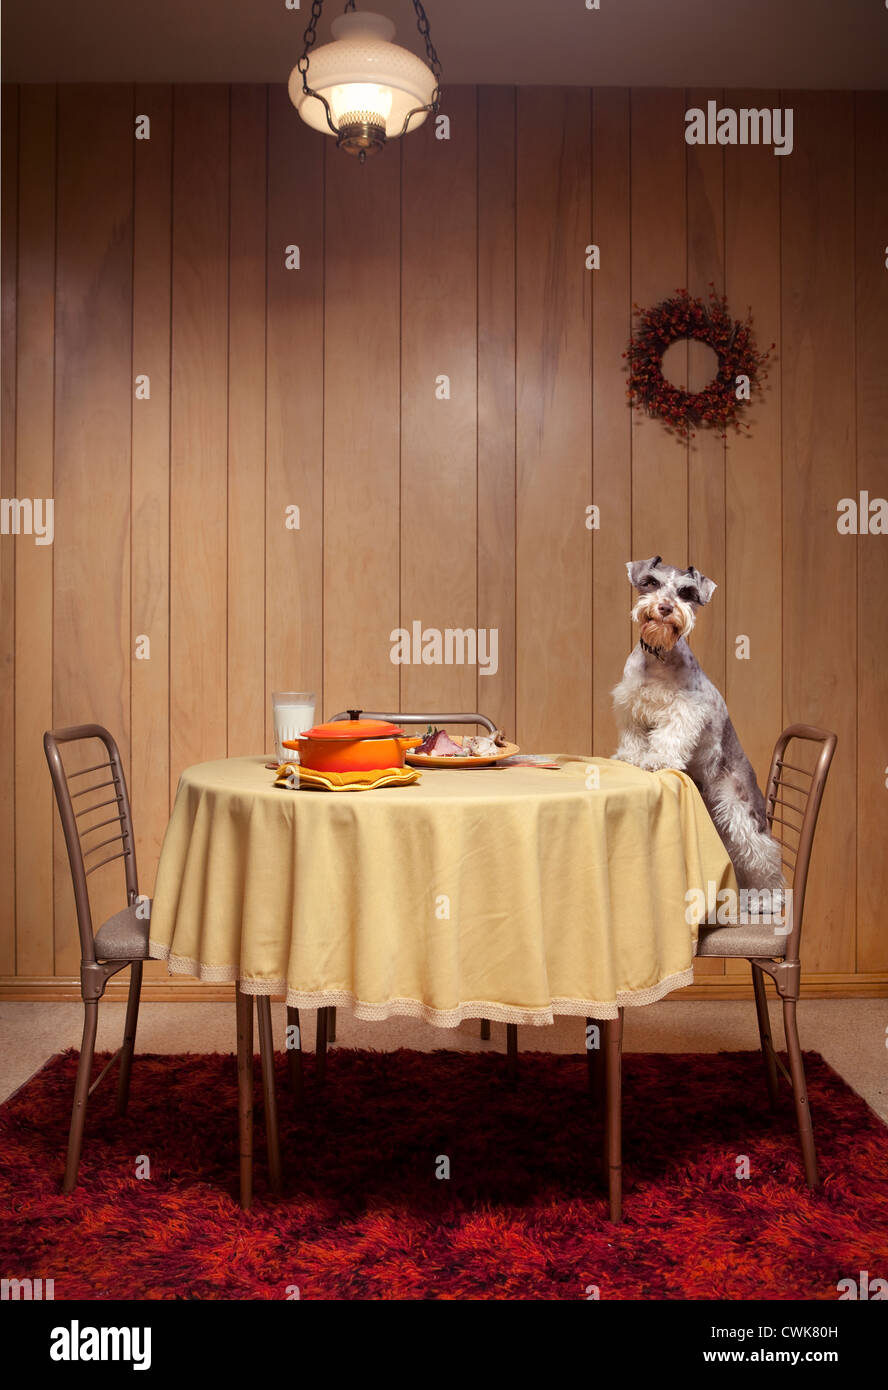 Miniature schnauzer standing on chair at table Stock Photo